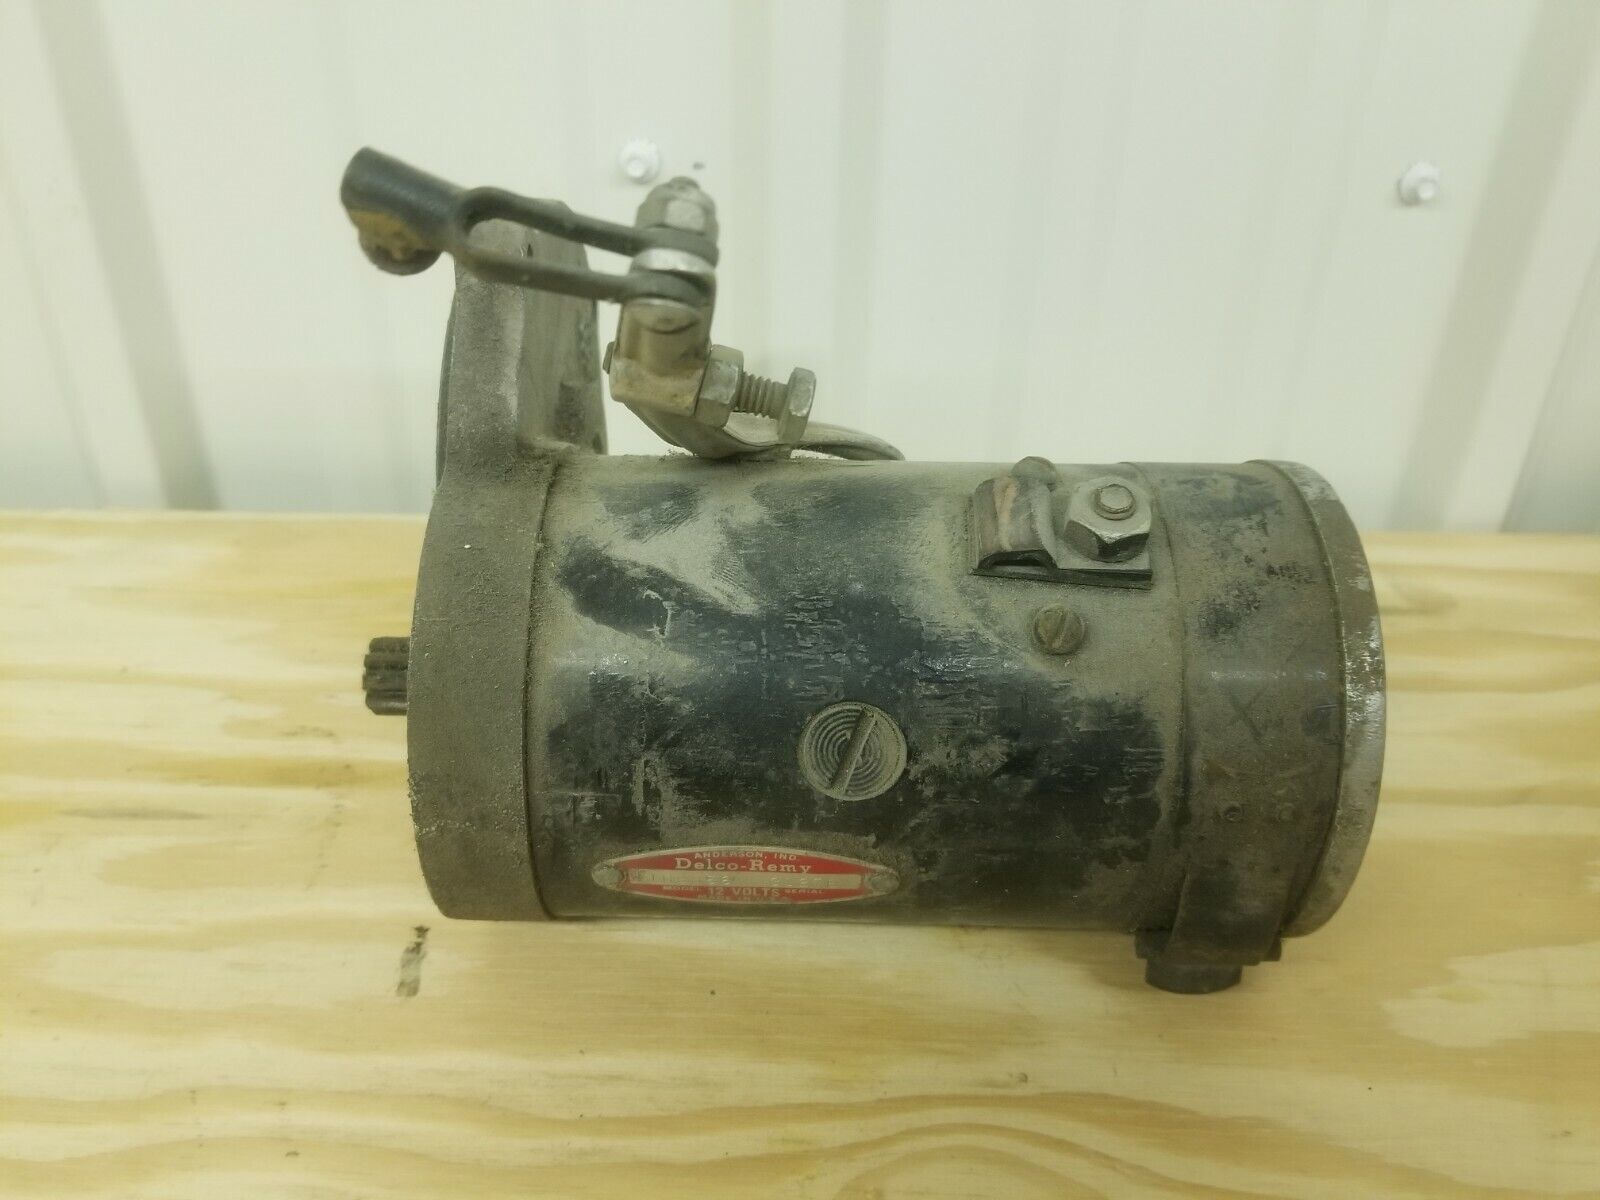 Delco-Remy Starter w/ Housing 1908539  Model-1109656, Continental, Works